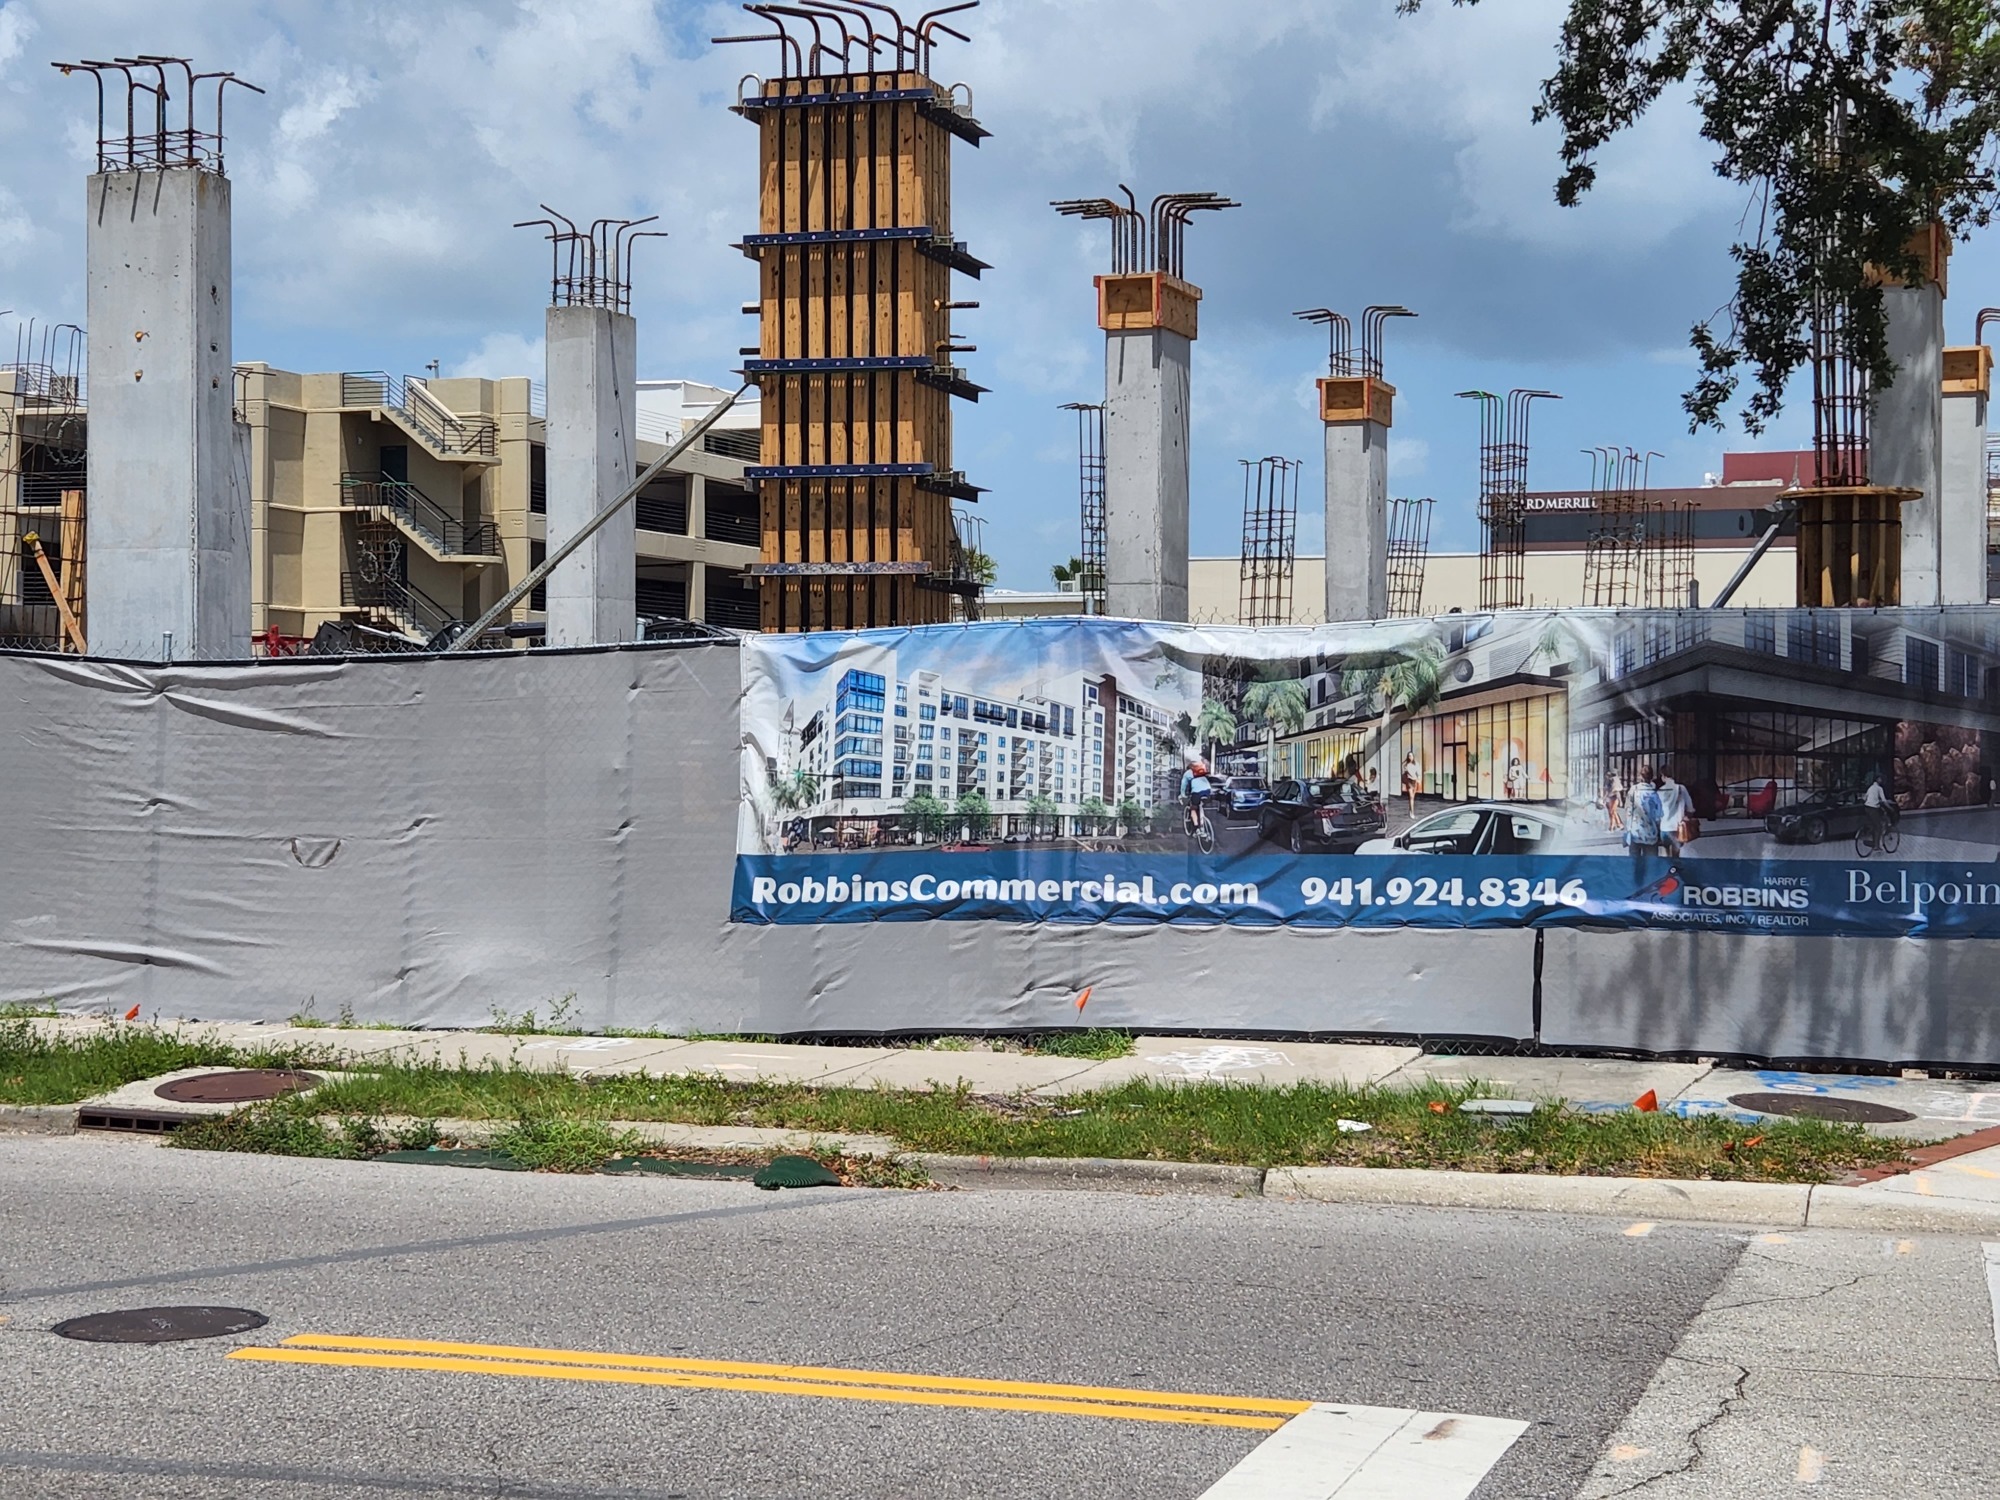 Vertical Construction is underway at One Main Plaza at the corner of Main Street and South Links Avenue in downtown Sarasota. (Photo by Andrew Warfield)